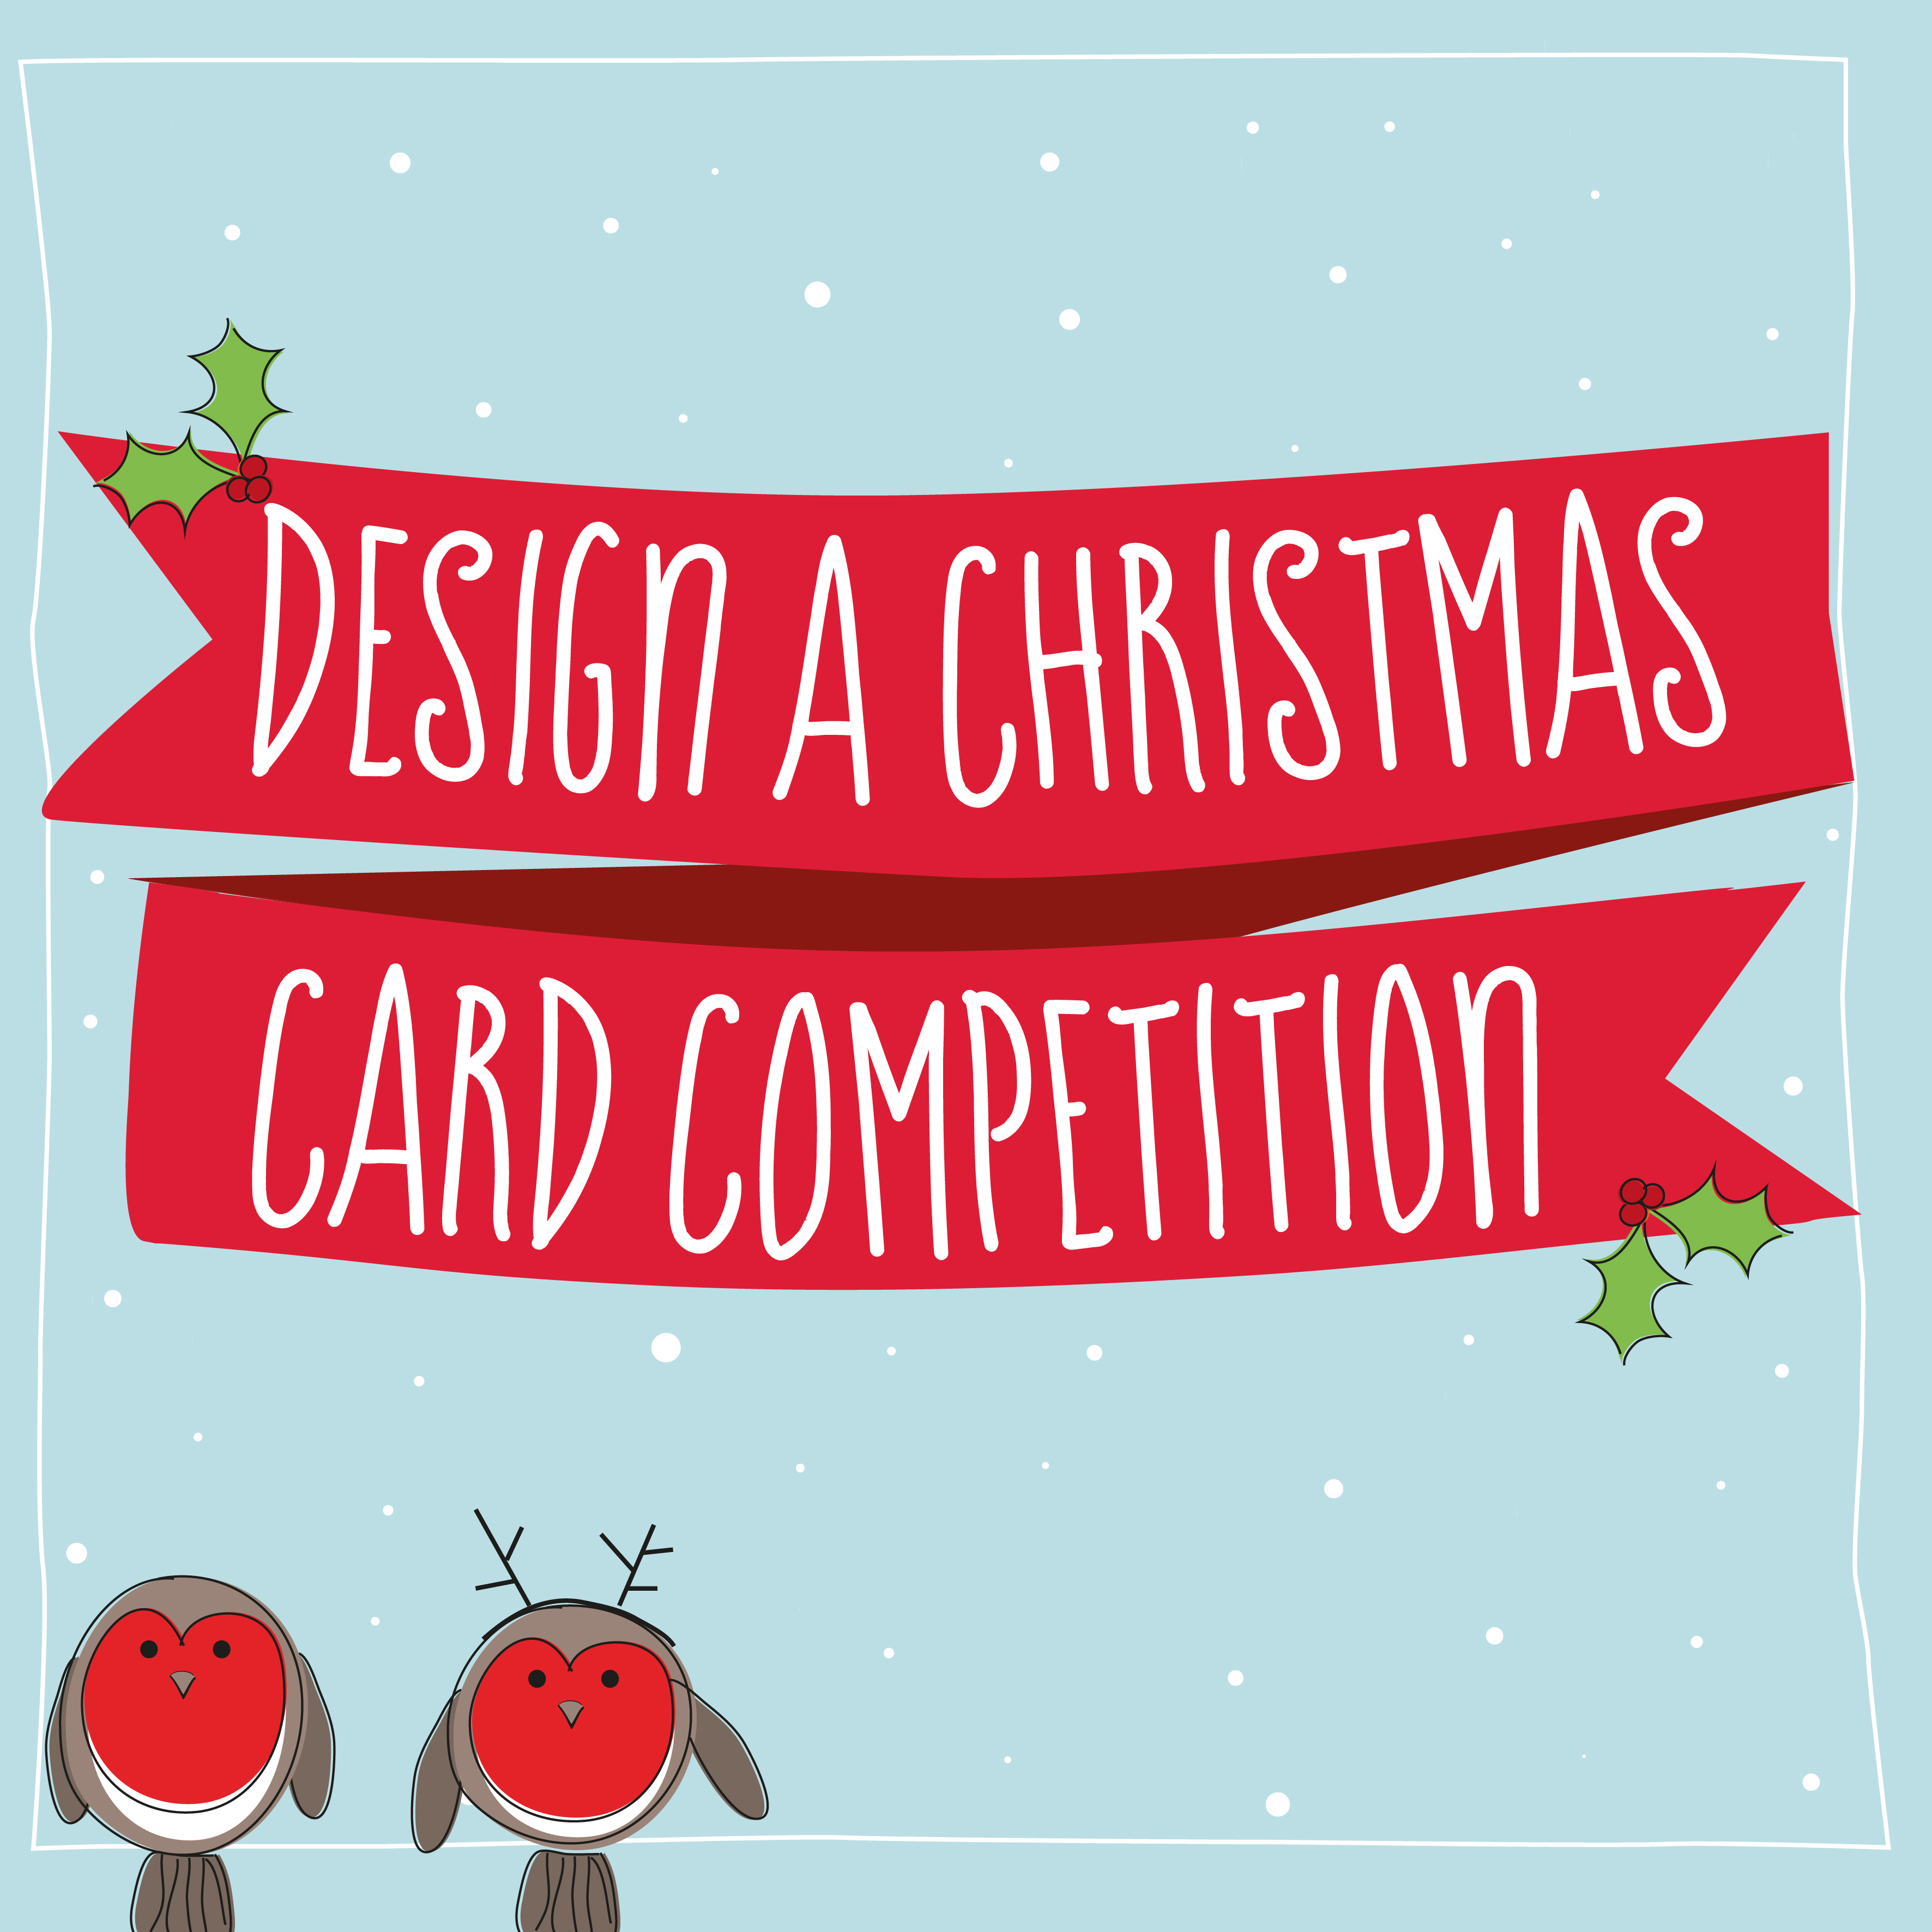 Design a Christmas card competition! - Dandelion Stationery